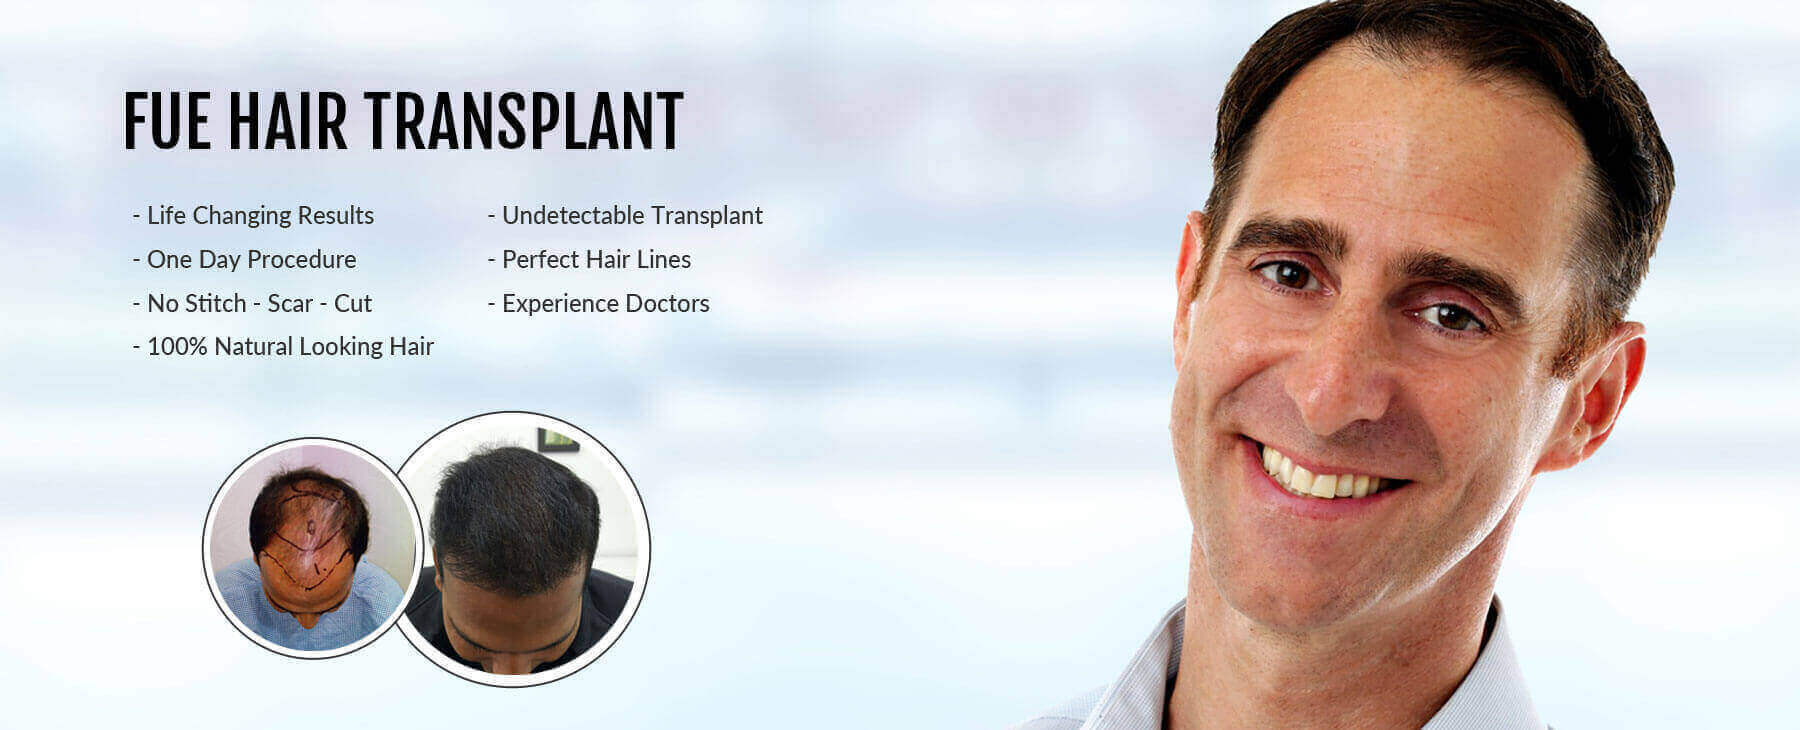 What Should You Know About FUE Hair Transplant in Delhi